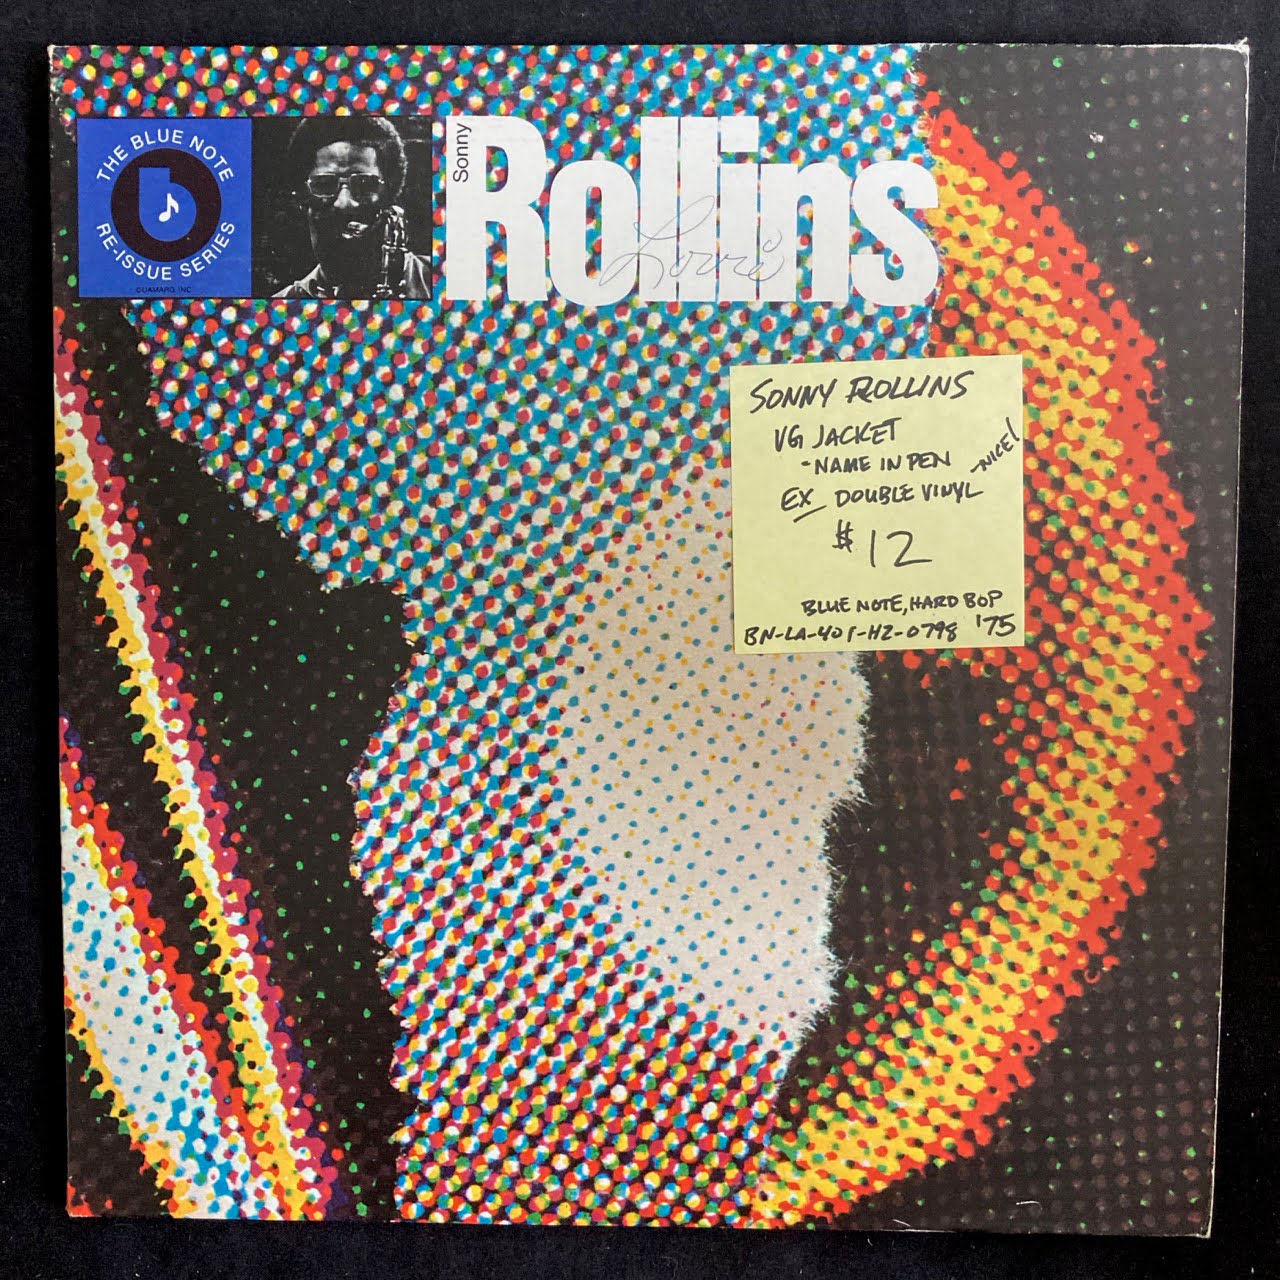 Sonny Rollins Used Vinyl Records For Sale